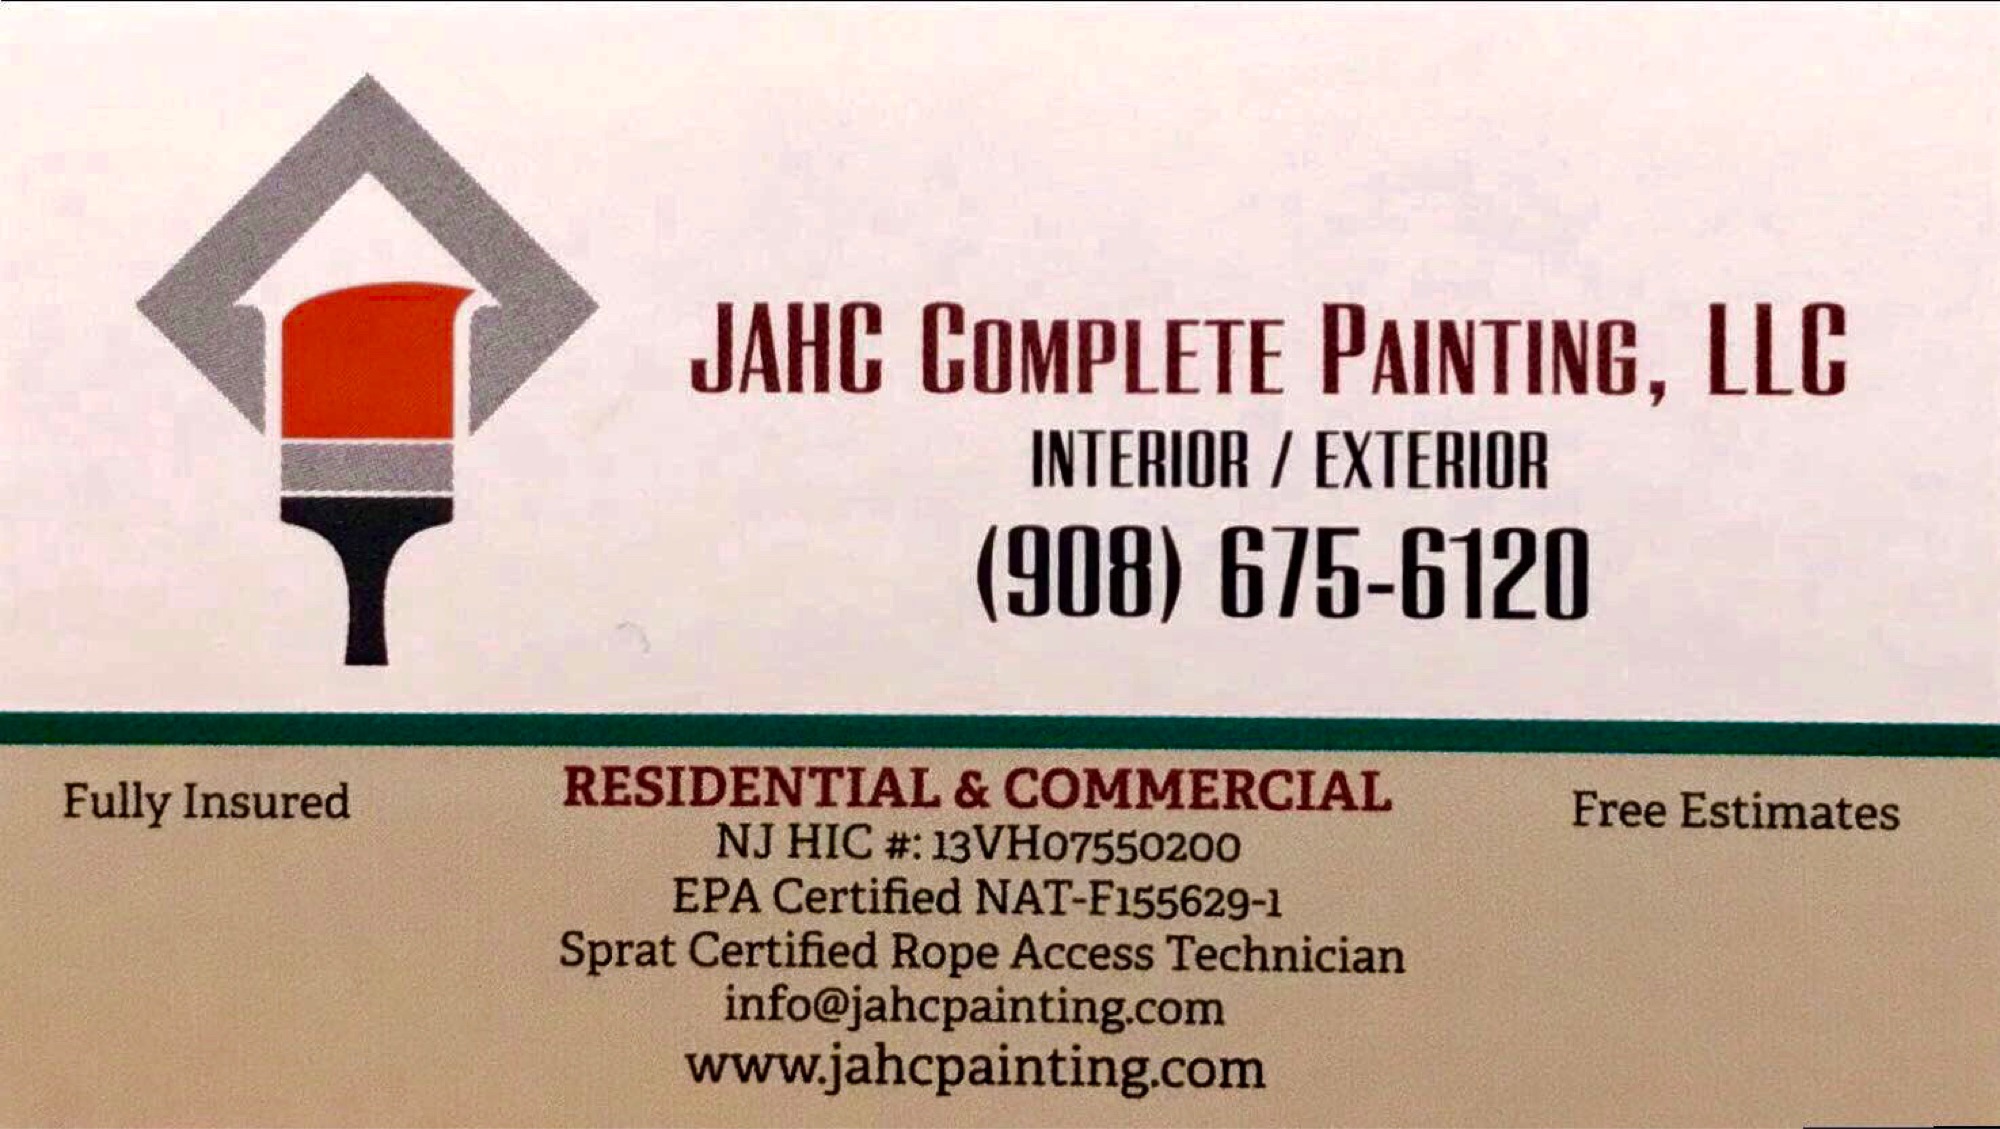 JAHC Complete Painting Logo